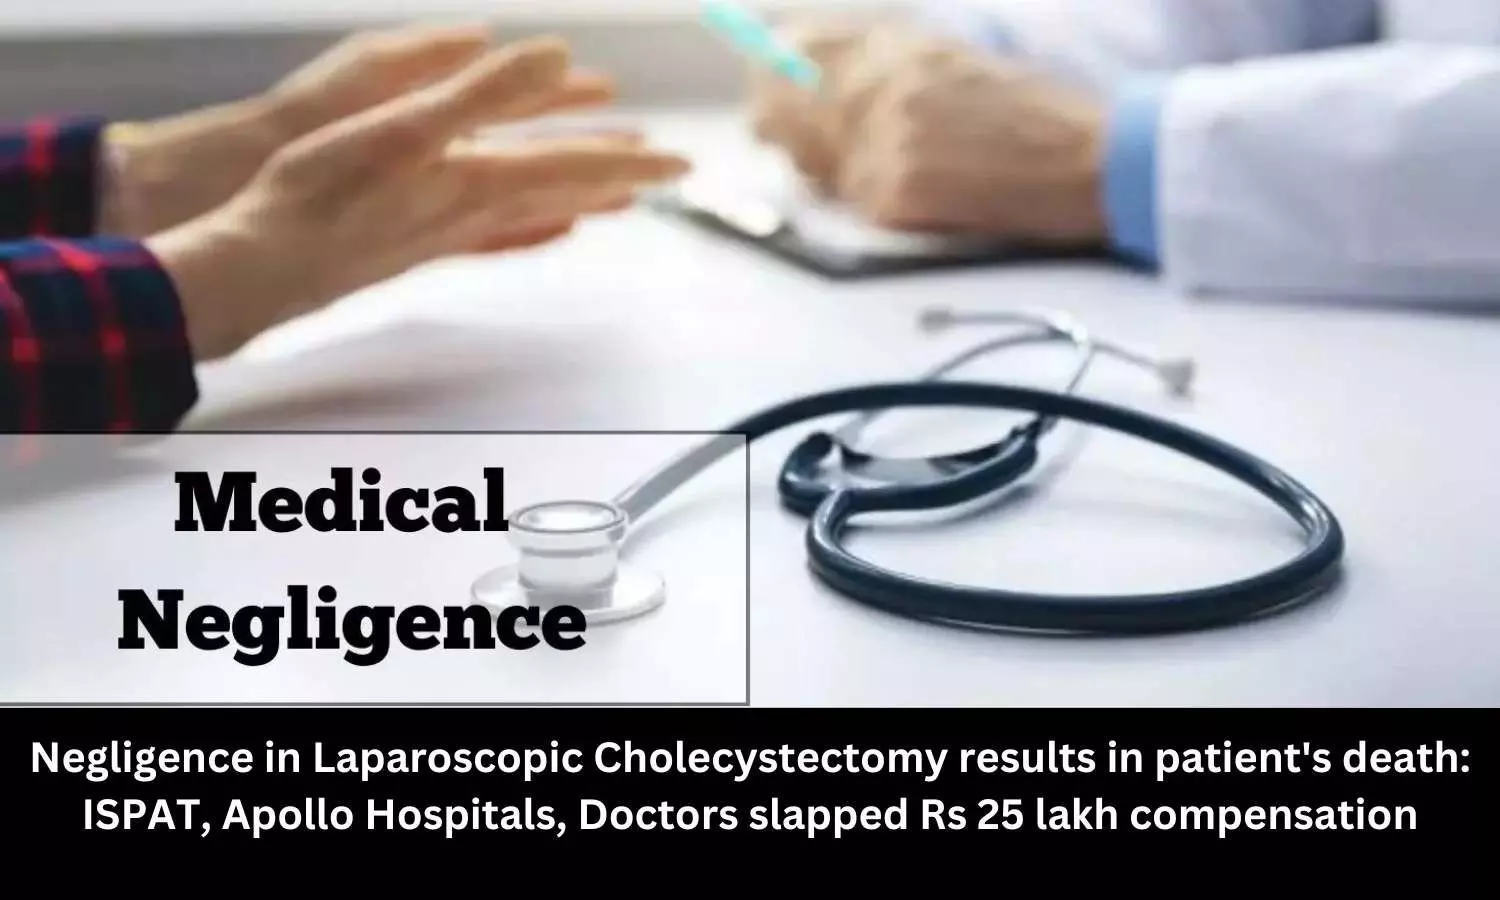 Negligence in Laparoscopic Cholecystectomy results in patient death: ISPAT, Apollo Hospitals, Doctors slapped Rs 25 lakh compensation